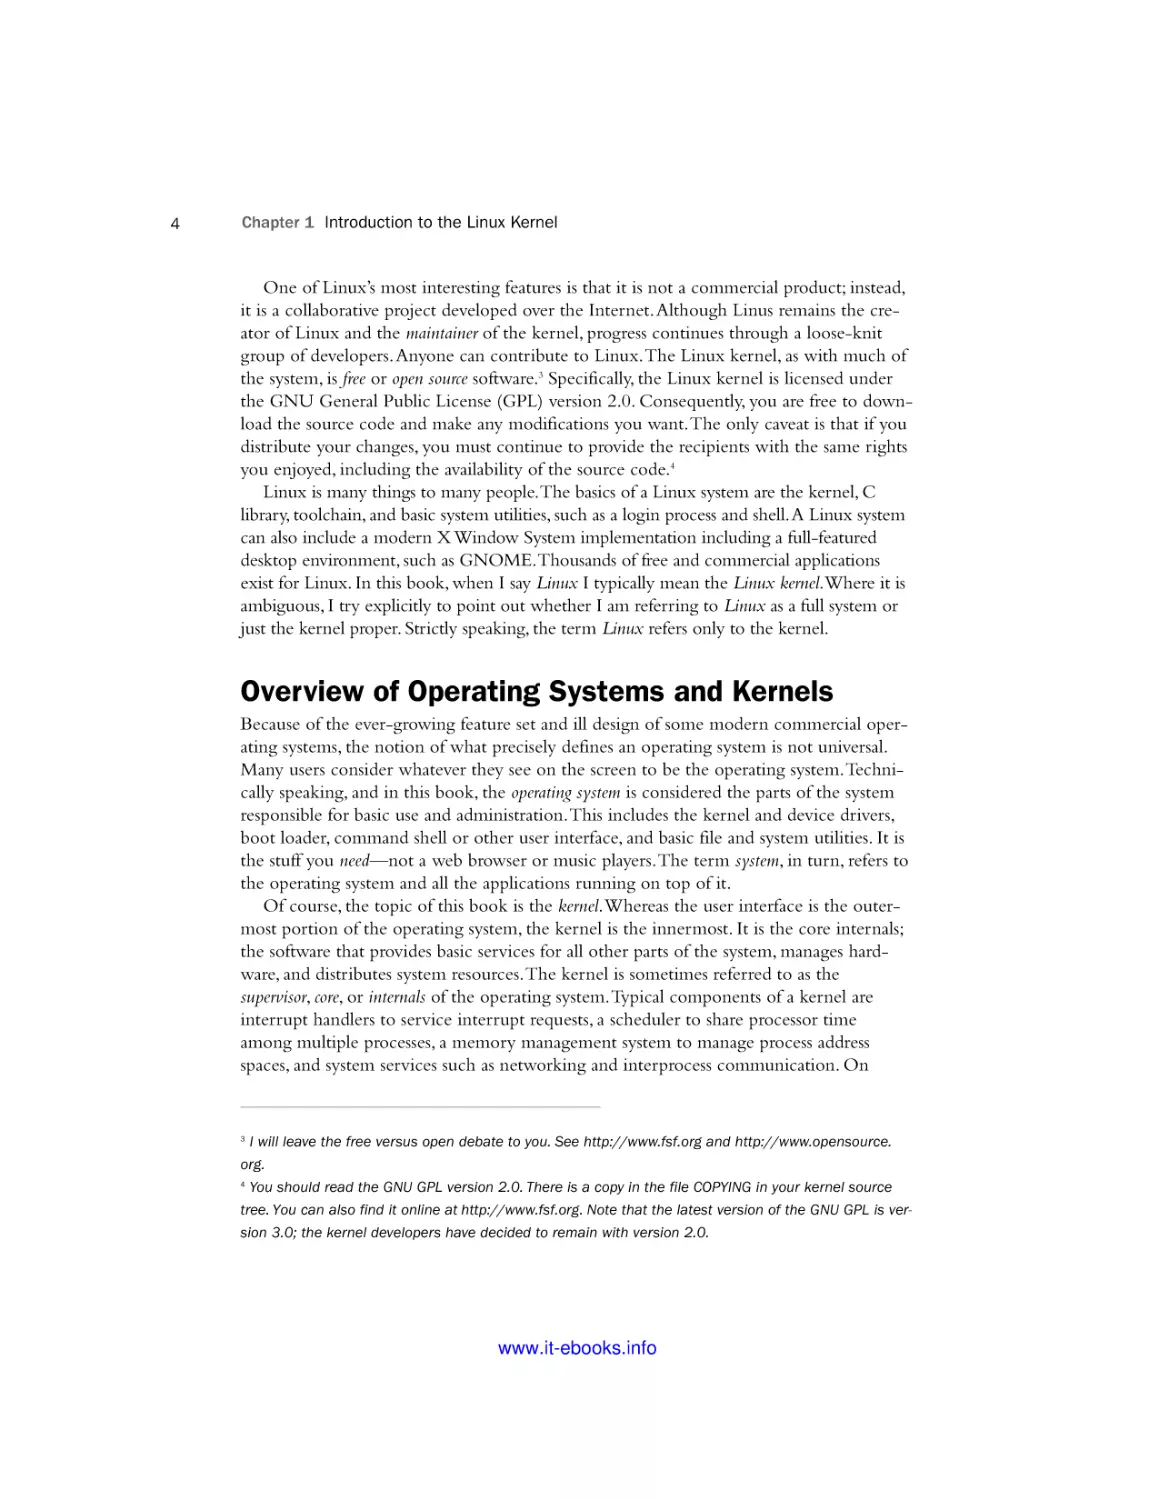 Overview of Operating Systems and Kernels